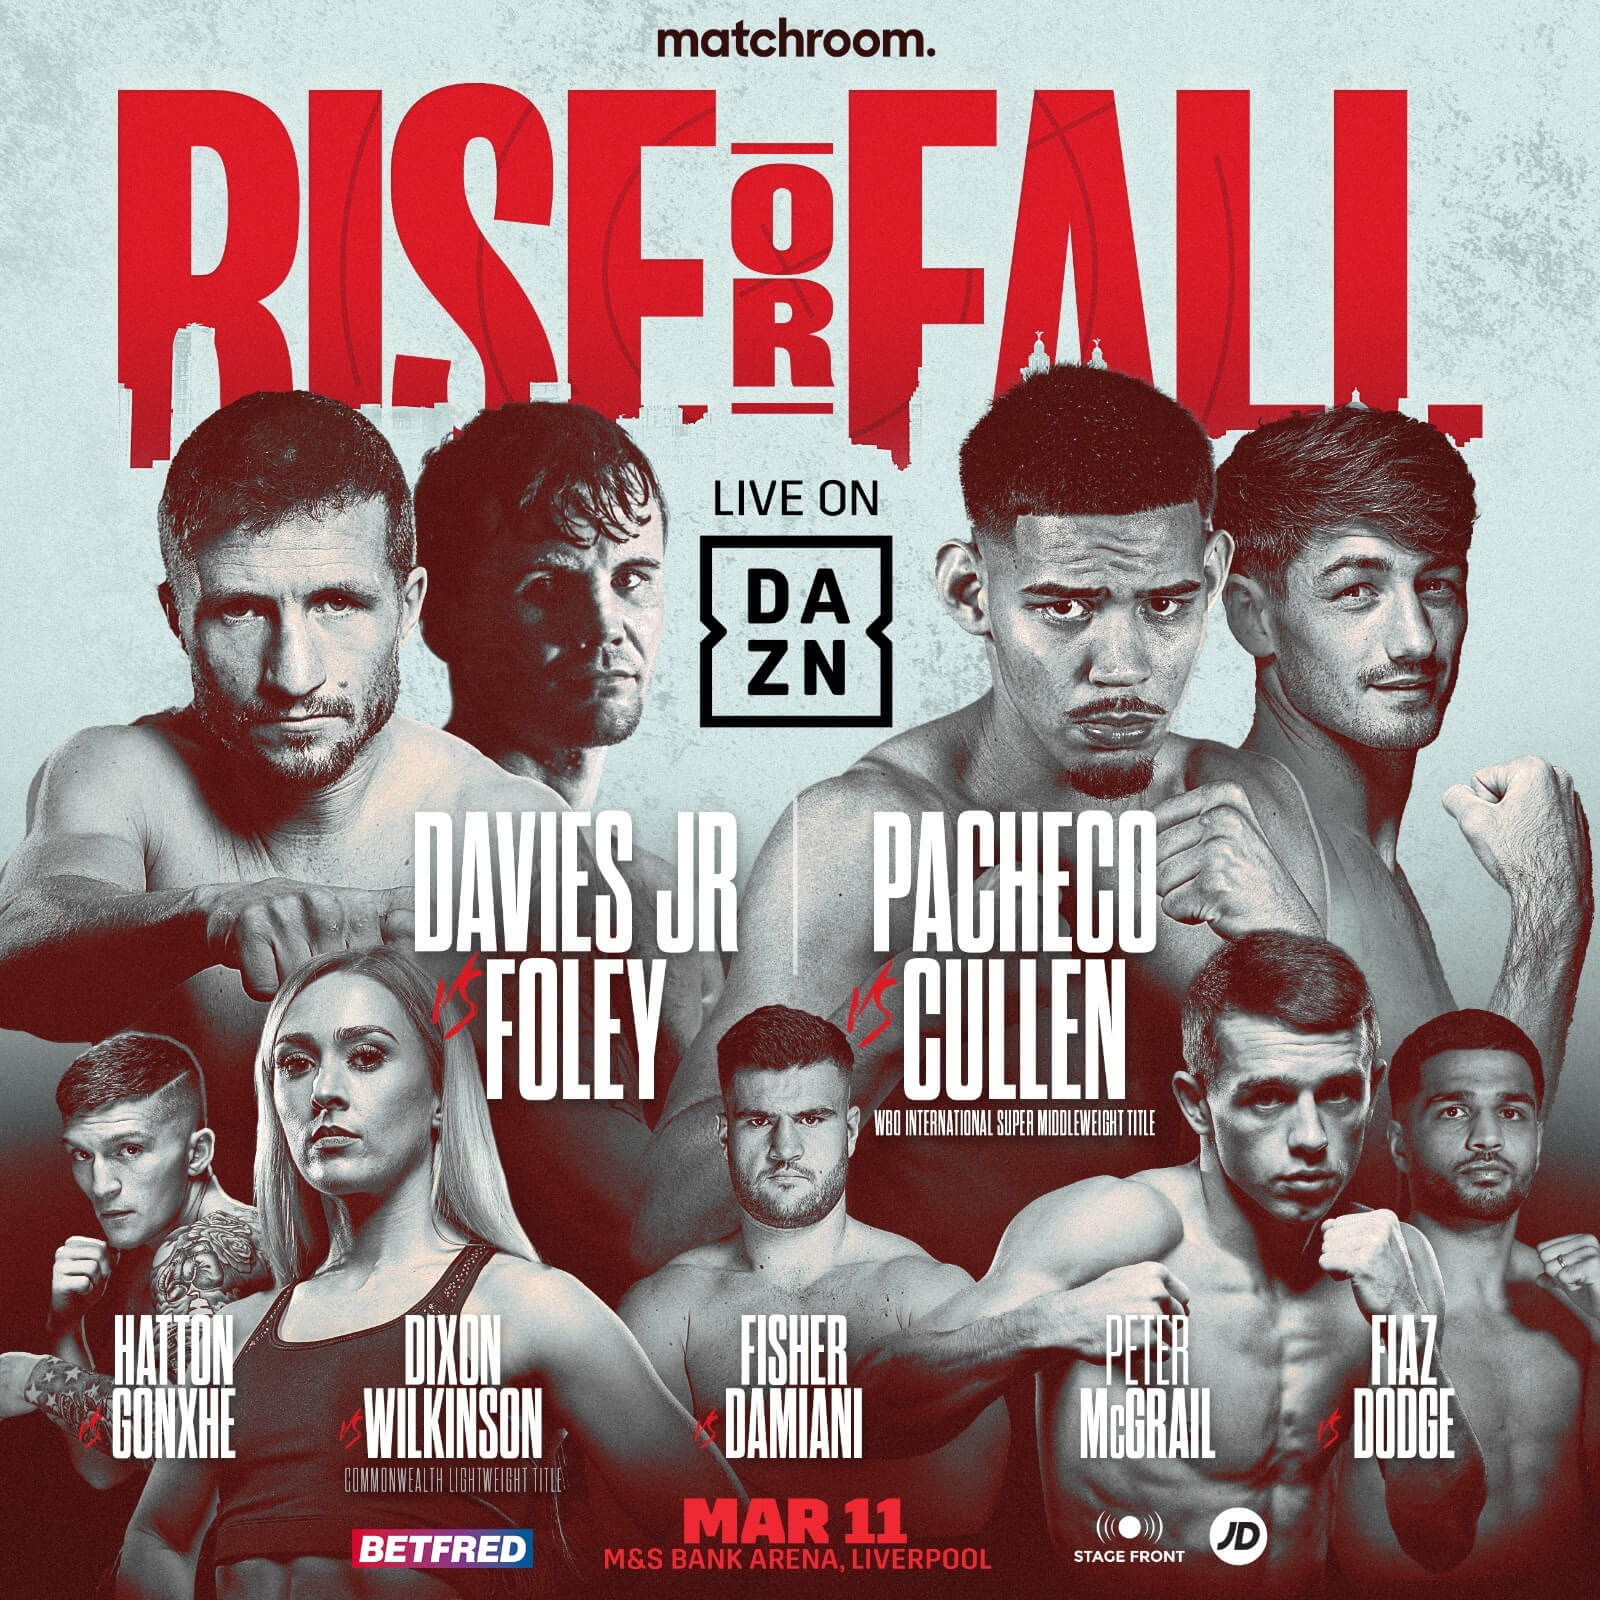  INJURY FORCES SMITH OUT OF STEPIEN CLASH; MARCH 11 SHOW GOES AHEAD WITH PACHECO vs. CULLEN AND DAVIES JR vs. FOLEY CO-HEADLINING